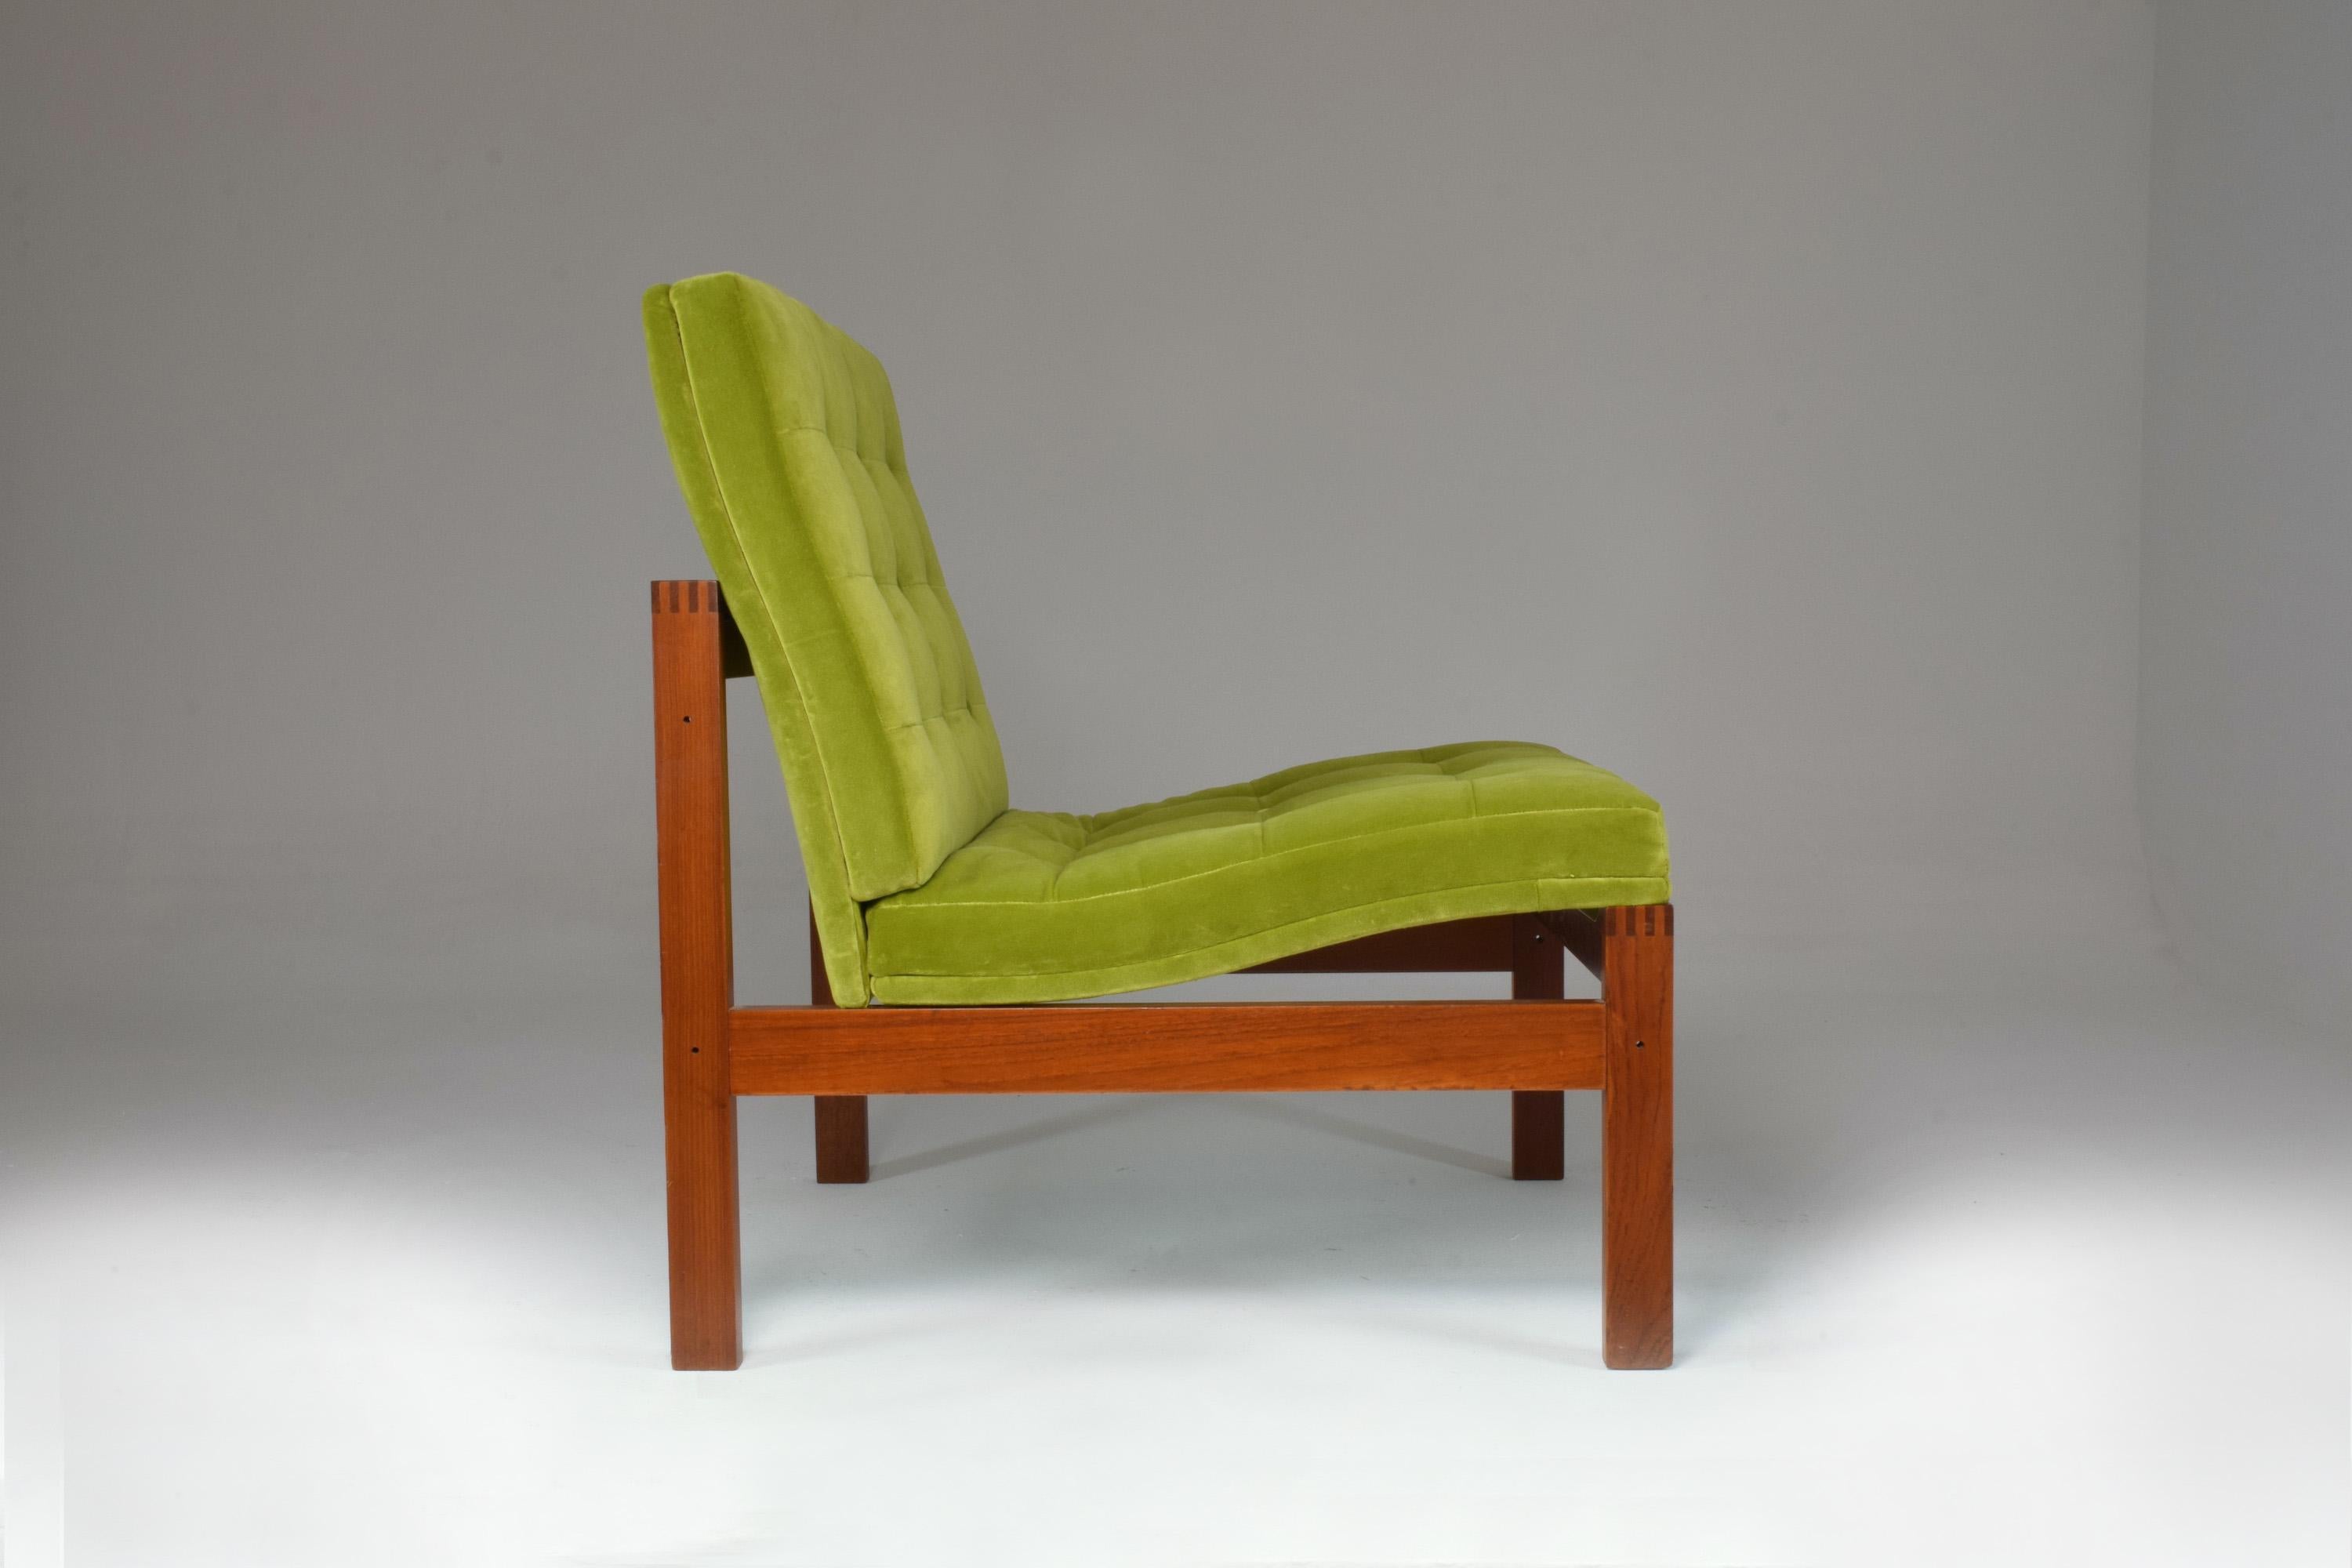 A Mid-Century Modern Danish collectible cool low lounge chair designed Ole Gjerløv-Knudsen for France & Søn. The sleek teak frame and upholstery are impeccably restored by our atelier in a beautiful lime green velvet with new foam padding. 



We